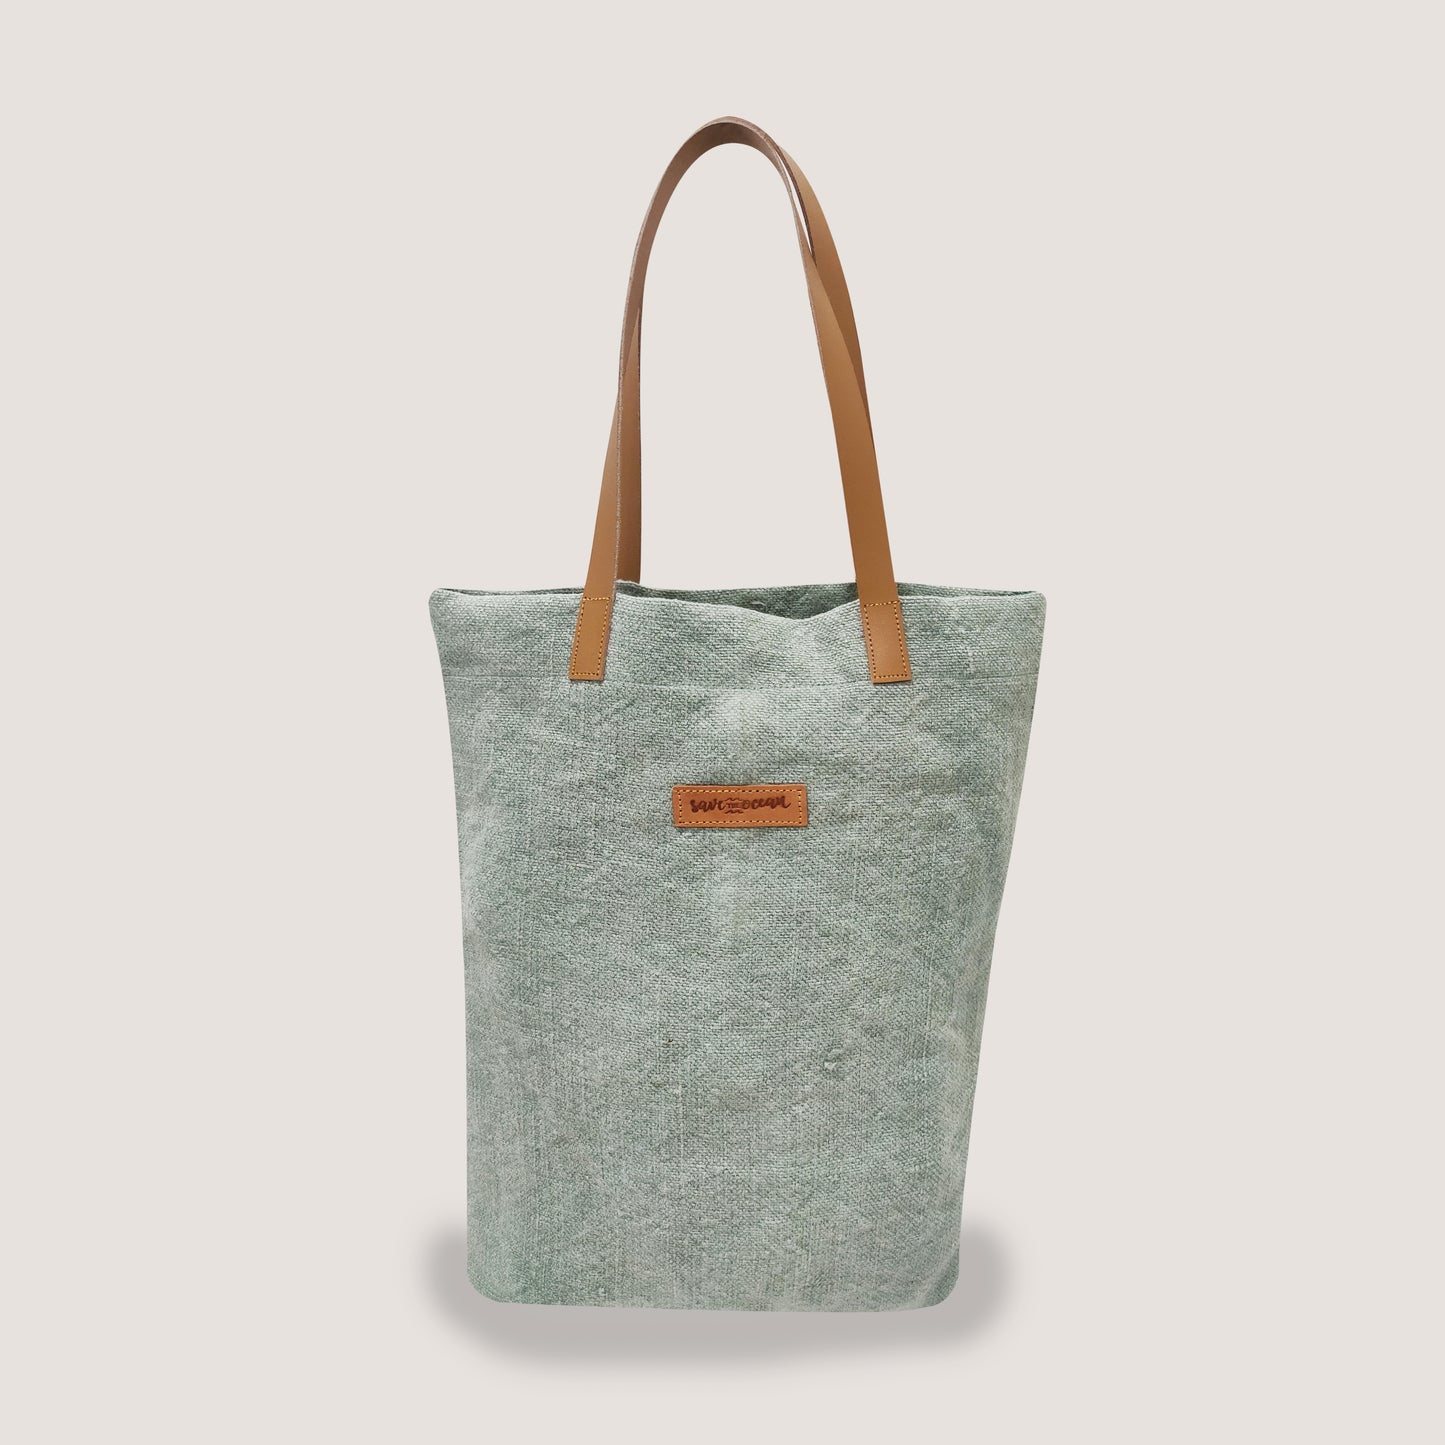 EARTHBAGS WASHED JUTE CANVAS TOTE BAG